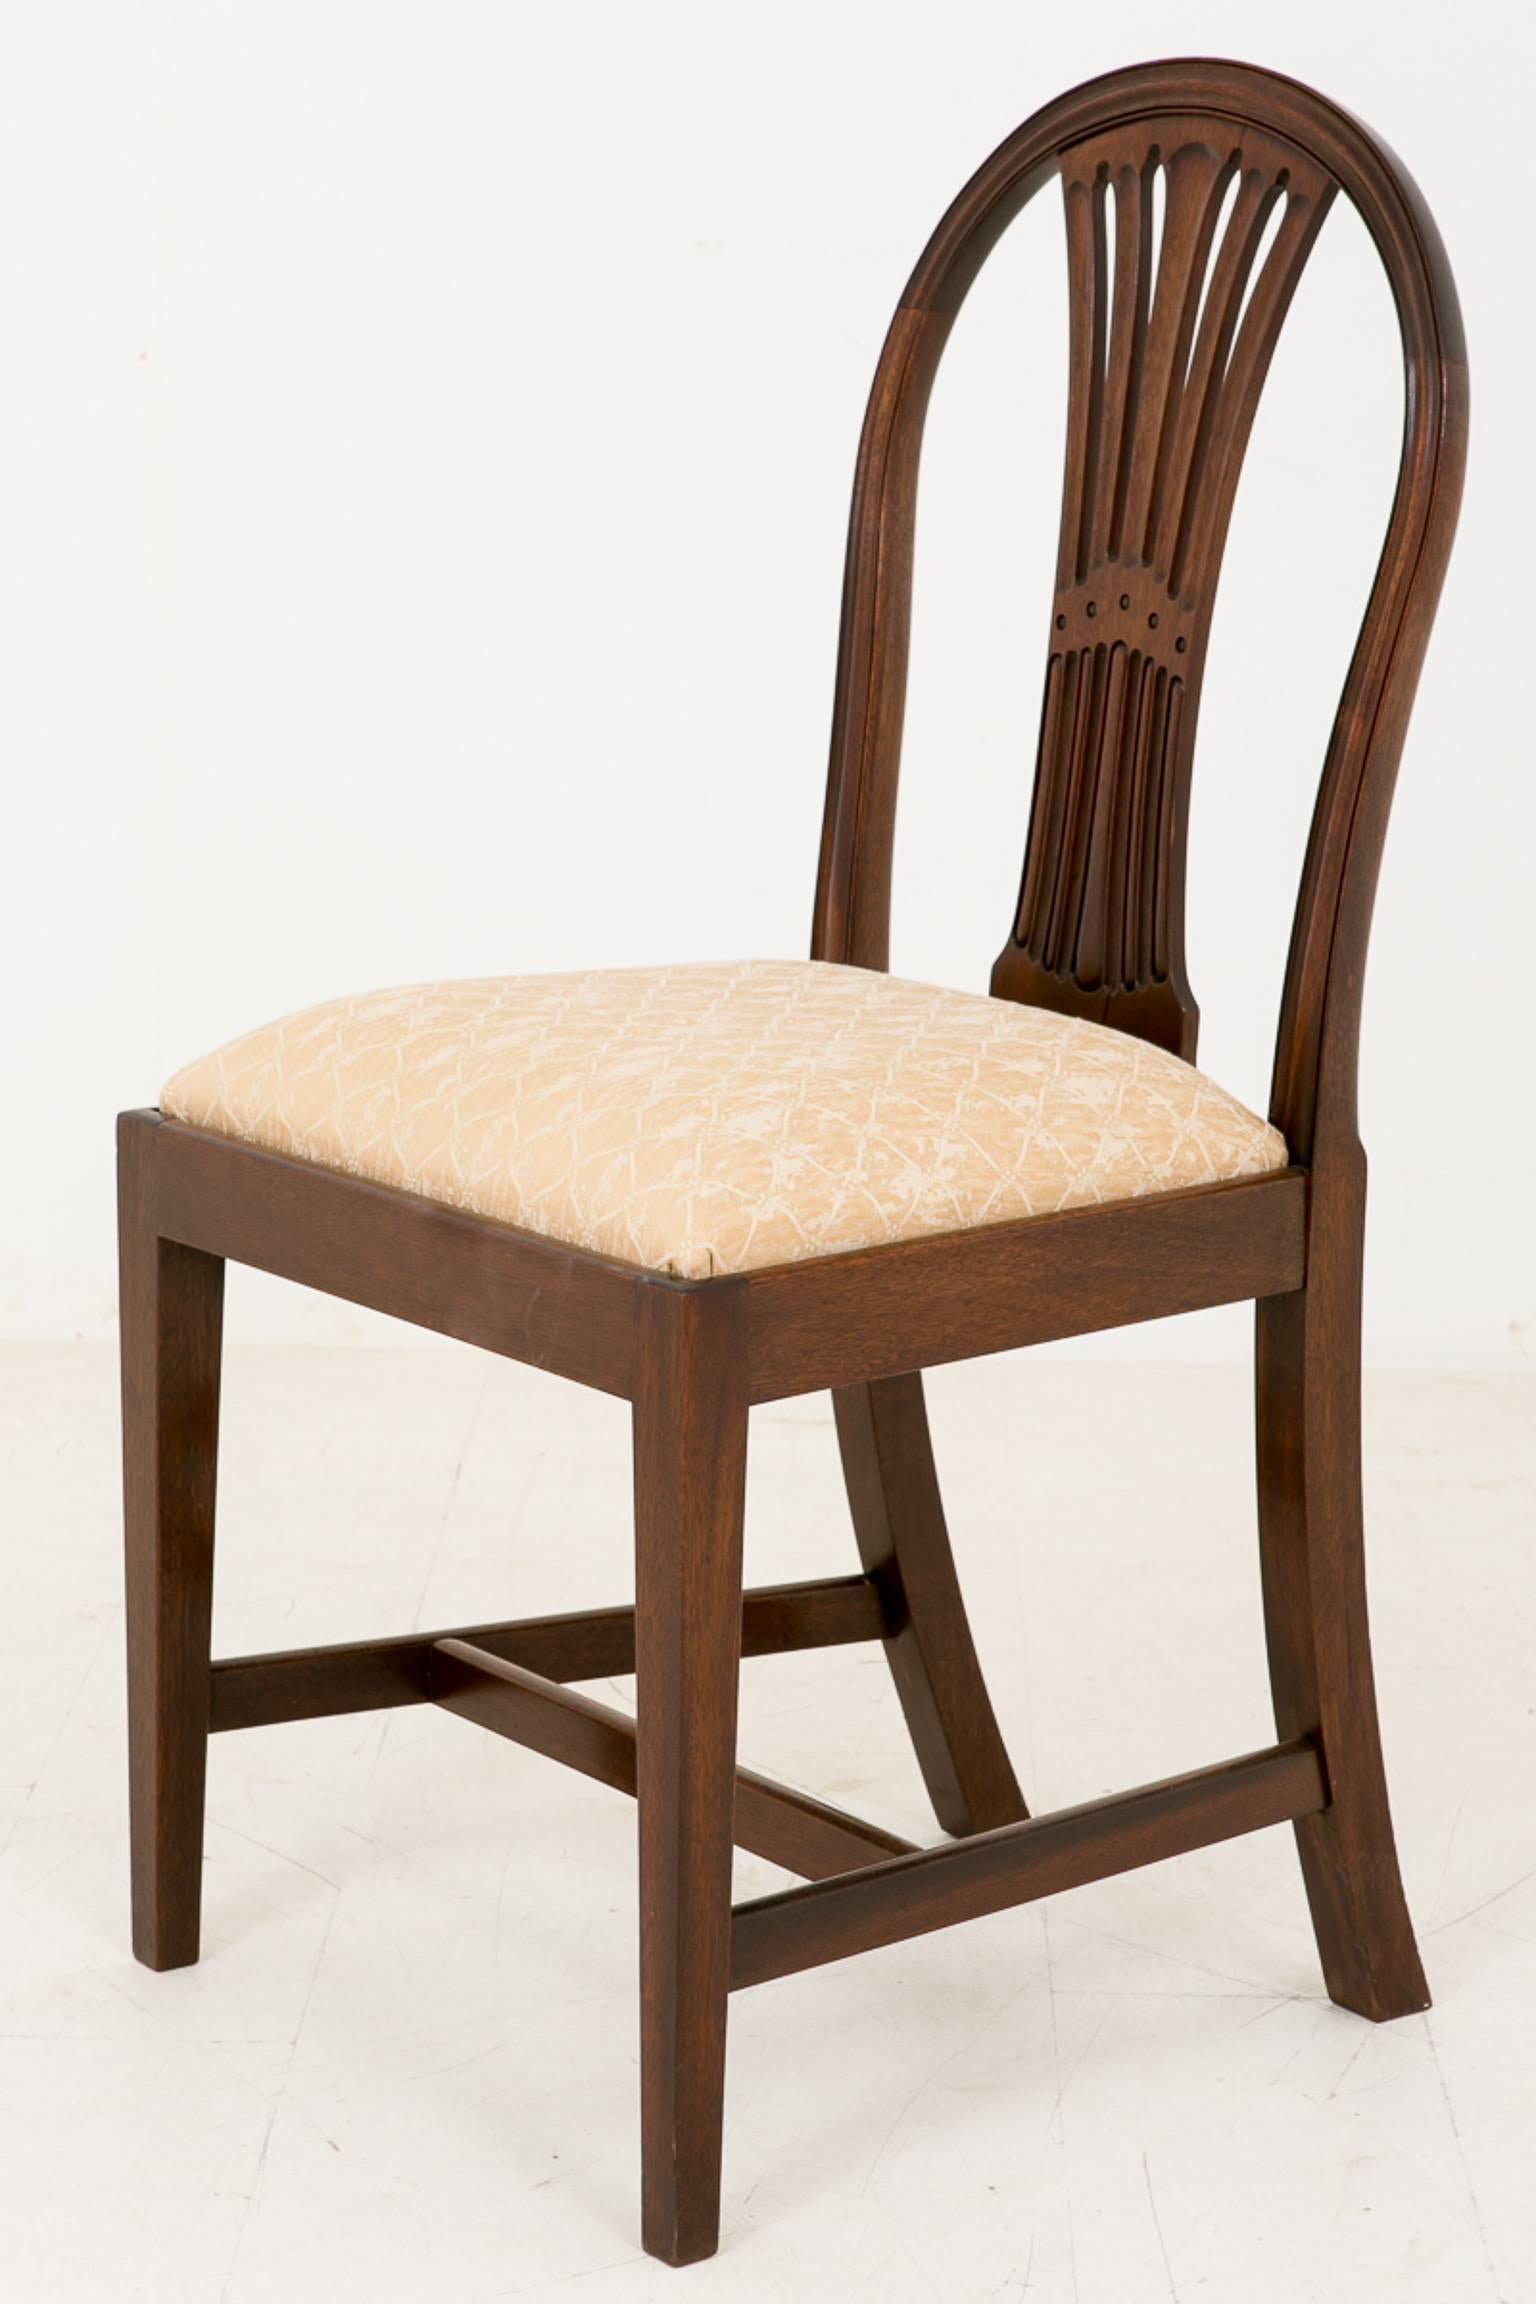 Set of ten mahogany Hepplewhite influenced dining chairs. Standing on square tapered legs. Each chair having a pierced and carved back splat.
These chairs have recently been refurbished and are in excellent condition.

Size:
Seat width 19